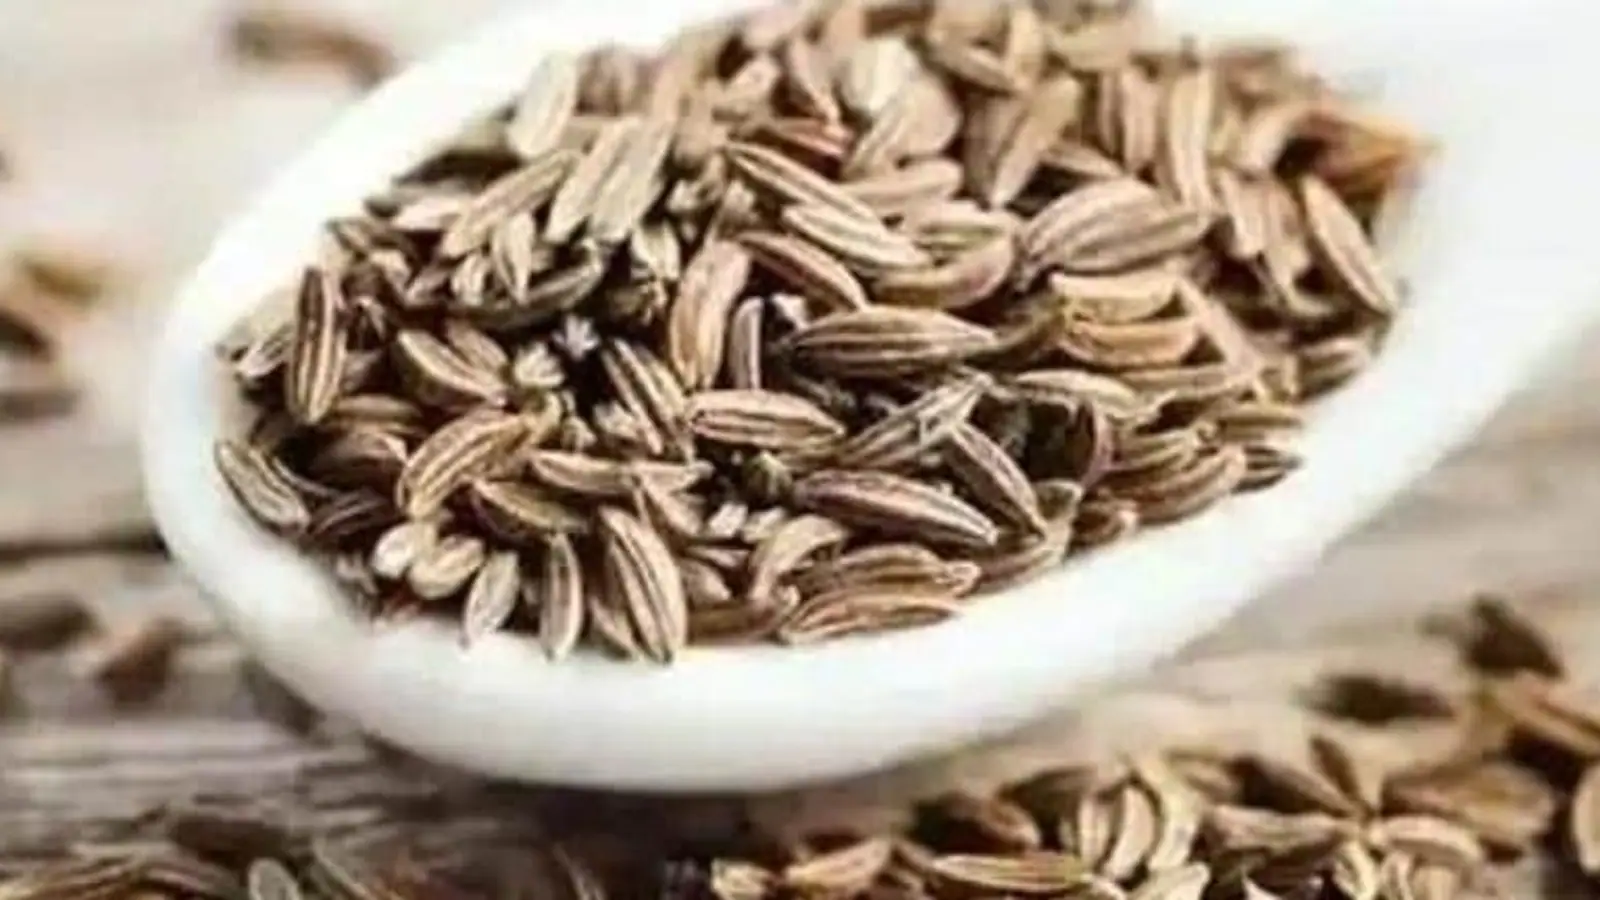 Inflation takes hold in spices; cumin prices reach five-year high